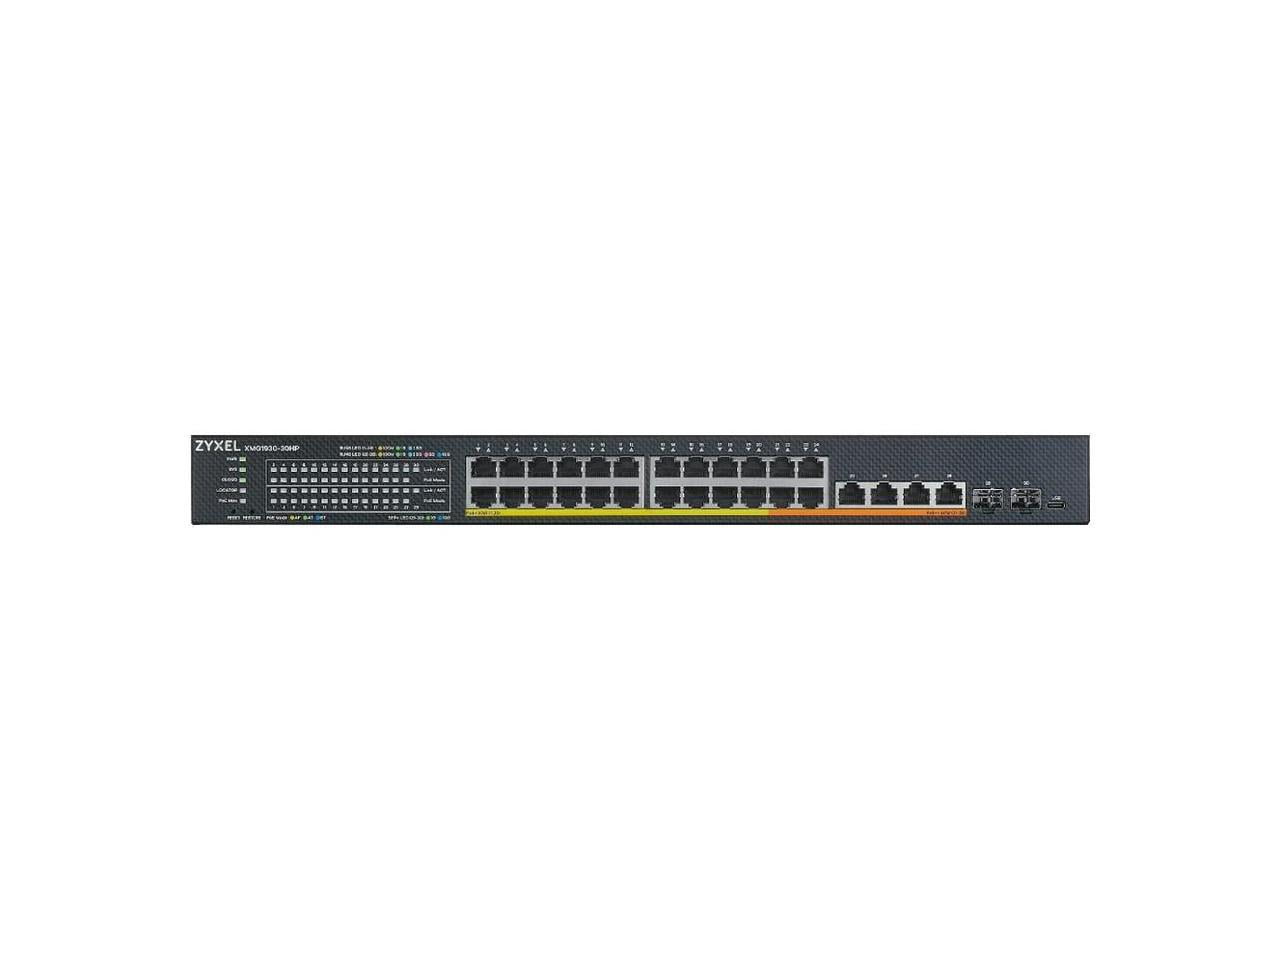 NeweggBusiness - ZYXEL XMG1930-30HP Ethernet Switch - 28 Ports - Manageable  - 2.5 Gigabit Ethernet, 10 Gigabit Ethernet - 2.5GBase-T, 10GBase-T,  10GBase-X - 3 Layer Supported - Modular - 864.10 W Power Consumption - 7